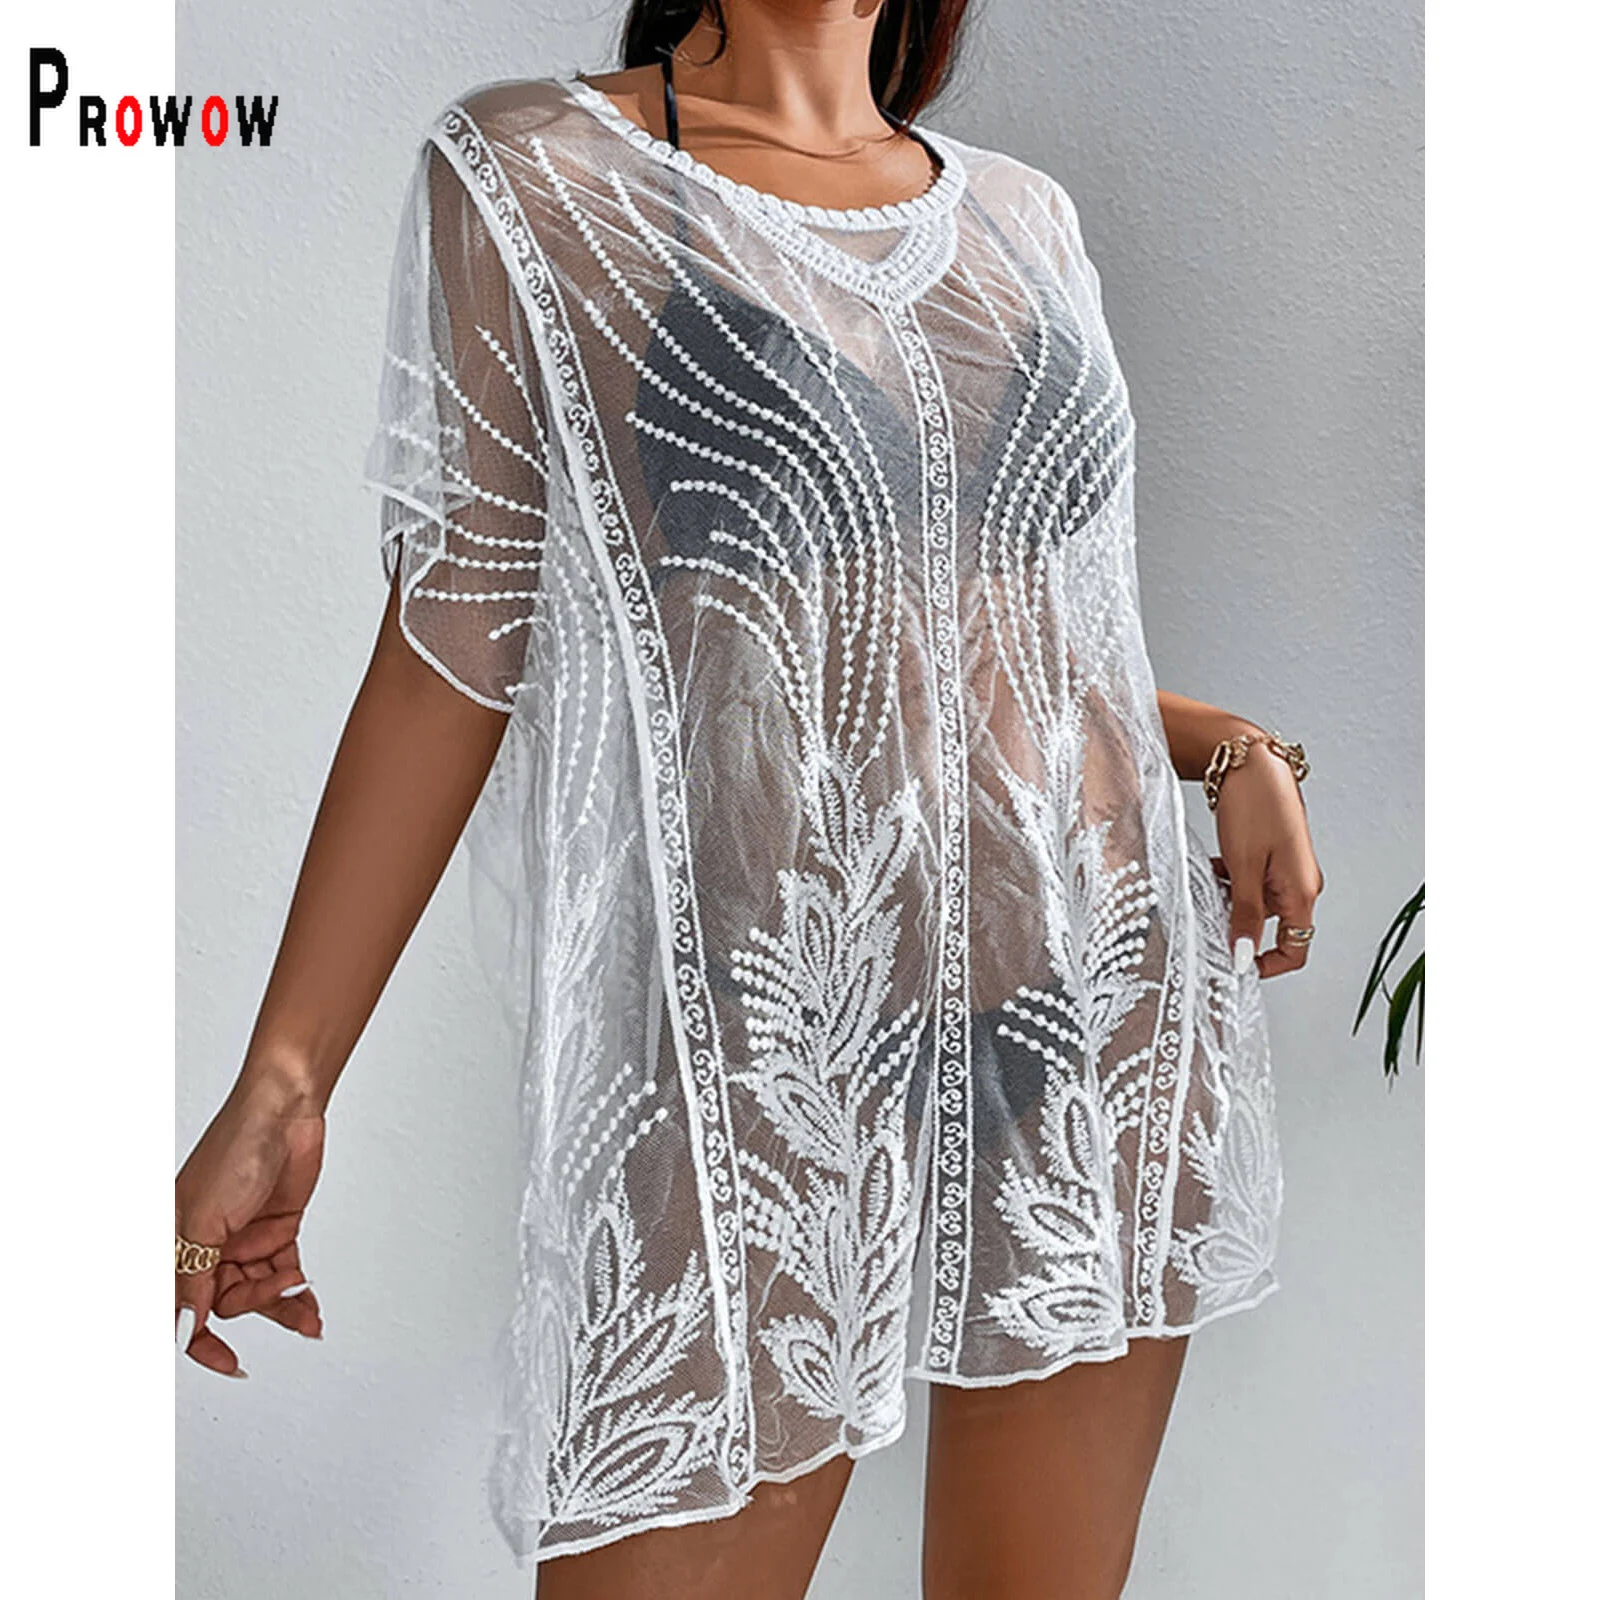 

Prowow Women Bikinis Cover-ups White Lace See Through Hem Slit Cover-up for Lady 2022 New Summer Female Beach Outfits